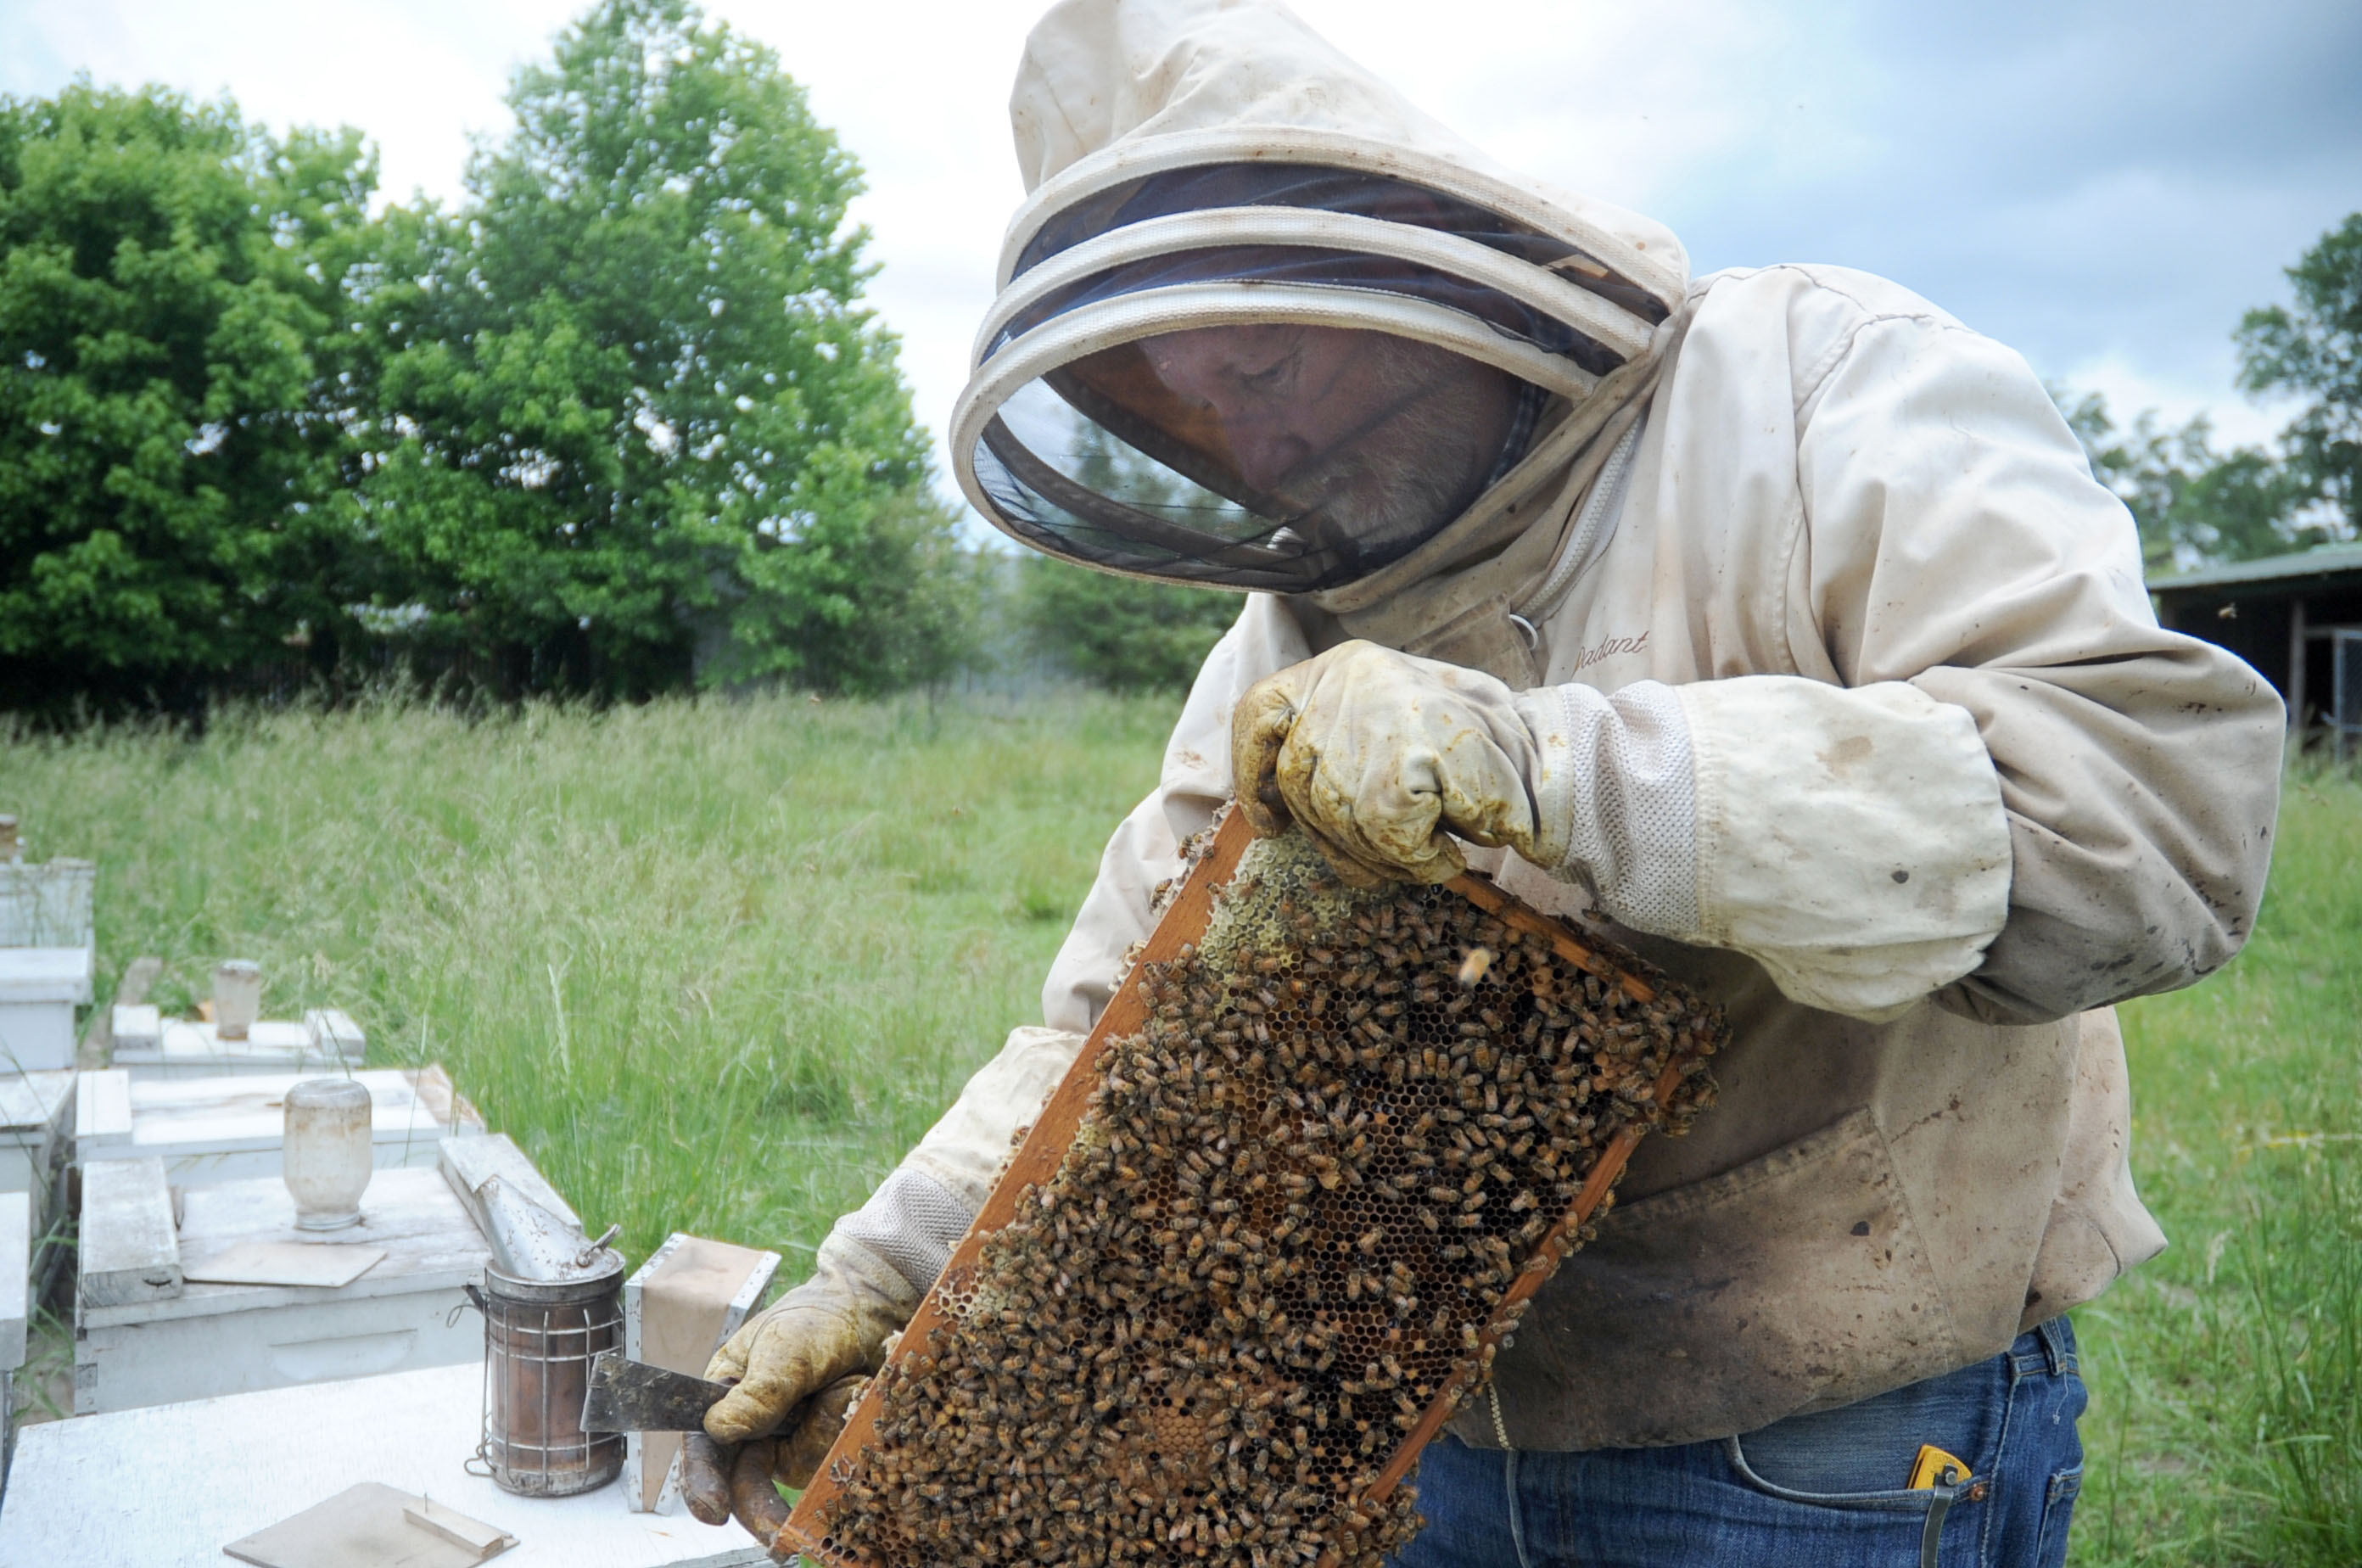 Beekeeper Alan Clingenpeel shows the inside of a bee hive in his apiary at his home on May 23, 2014 in Pearcy, Ark. (Mara Kuhn—AP)